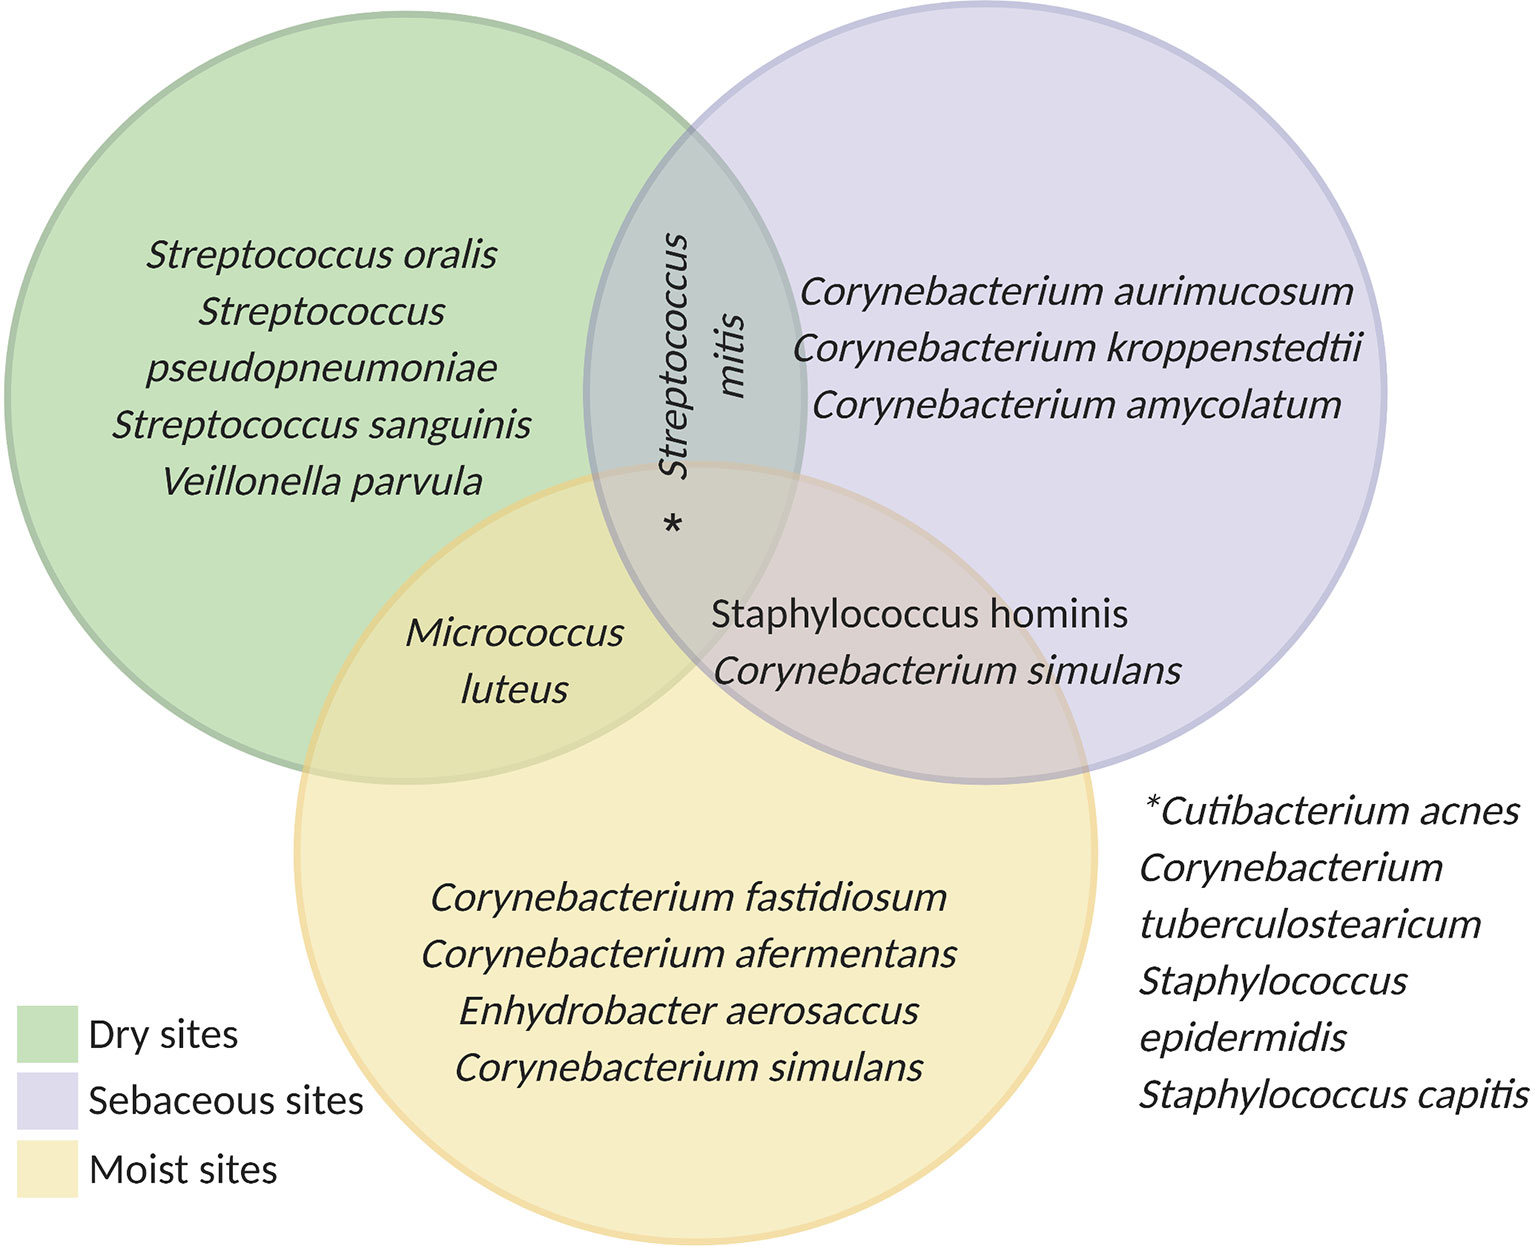 Differences Between Staphylococcus and Streptococcus - Microbiology Info.com